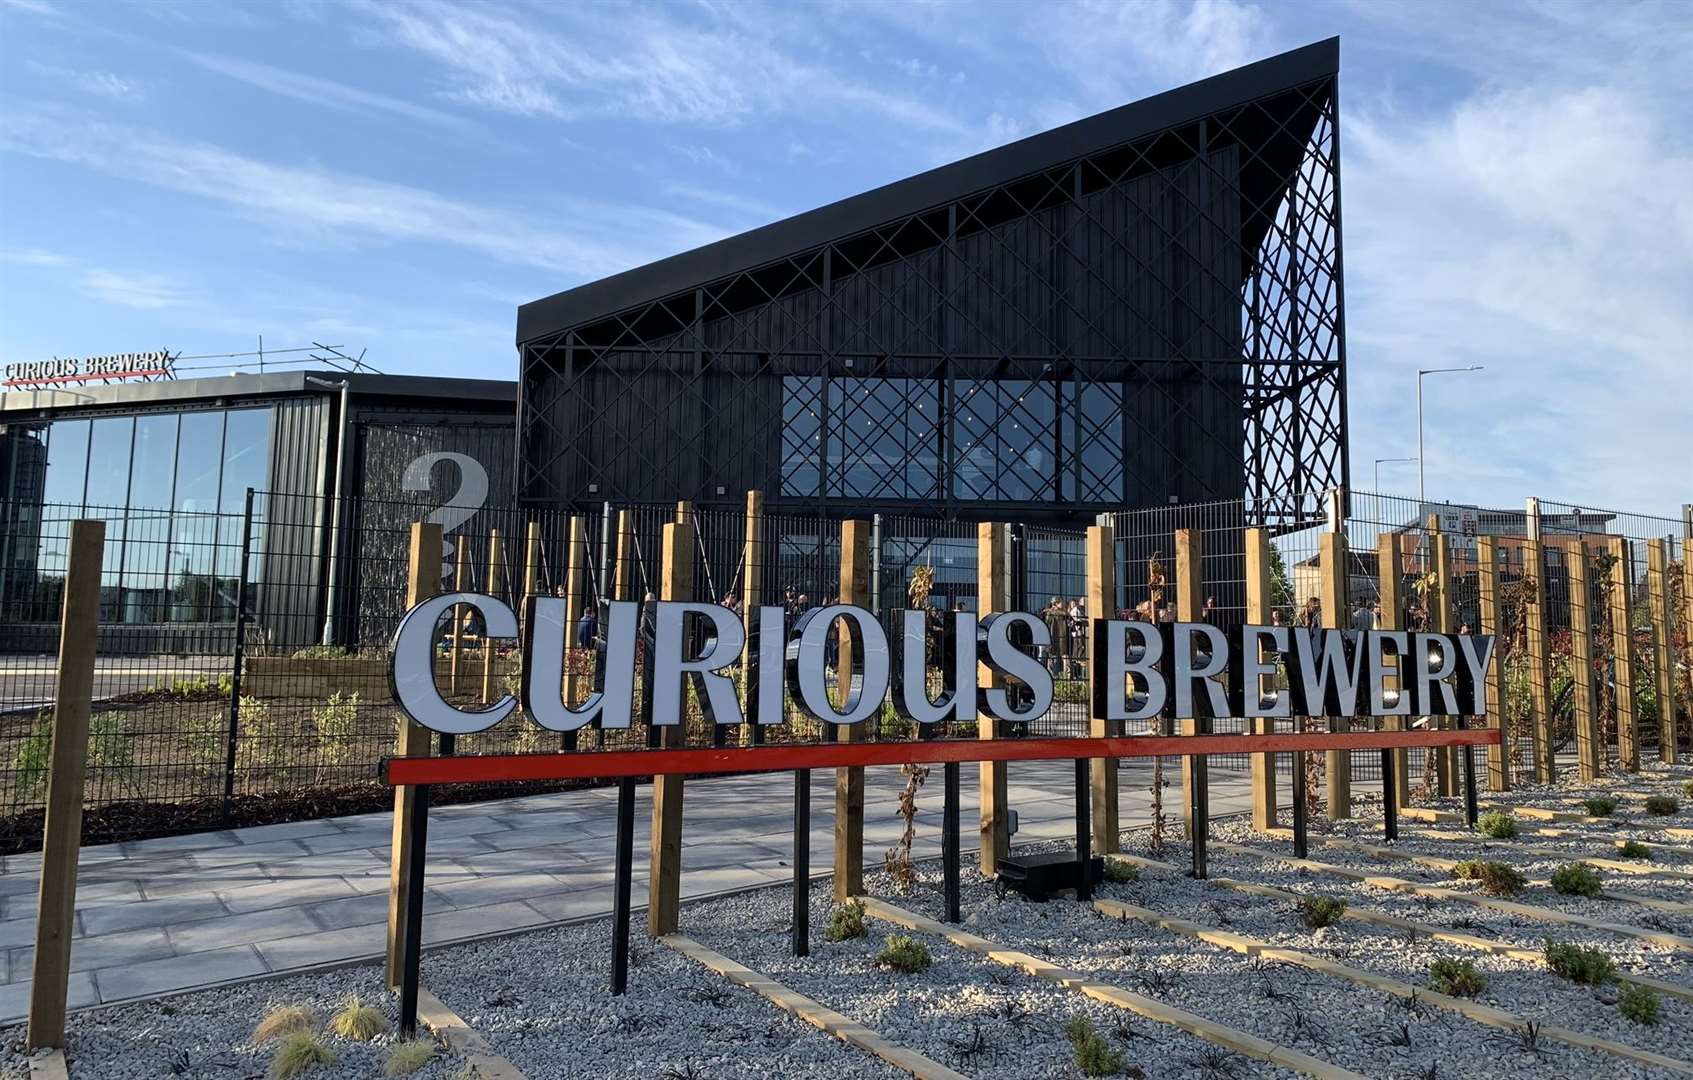 The Curious Brewery in Ashford